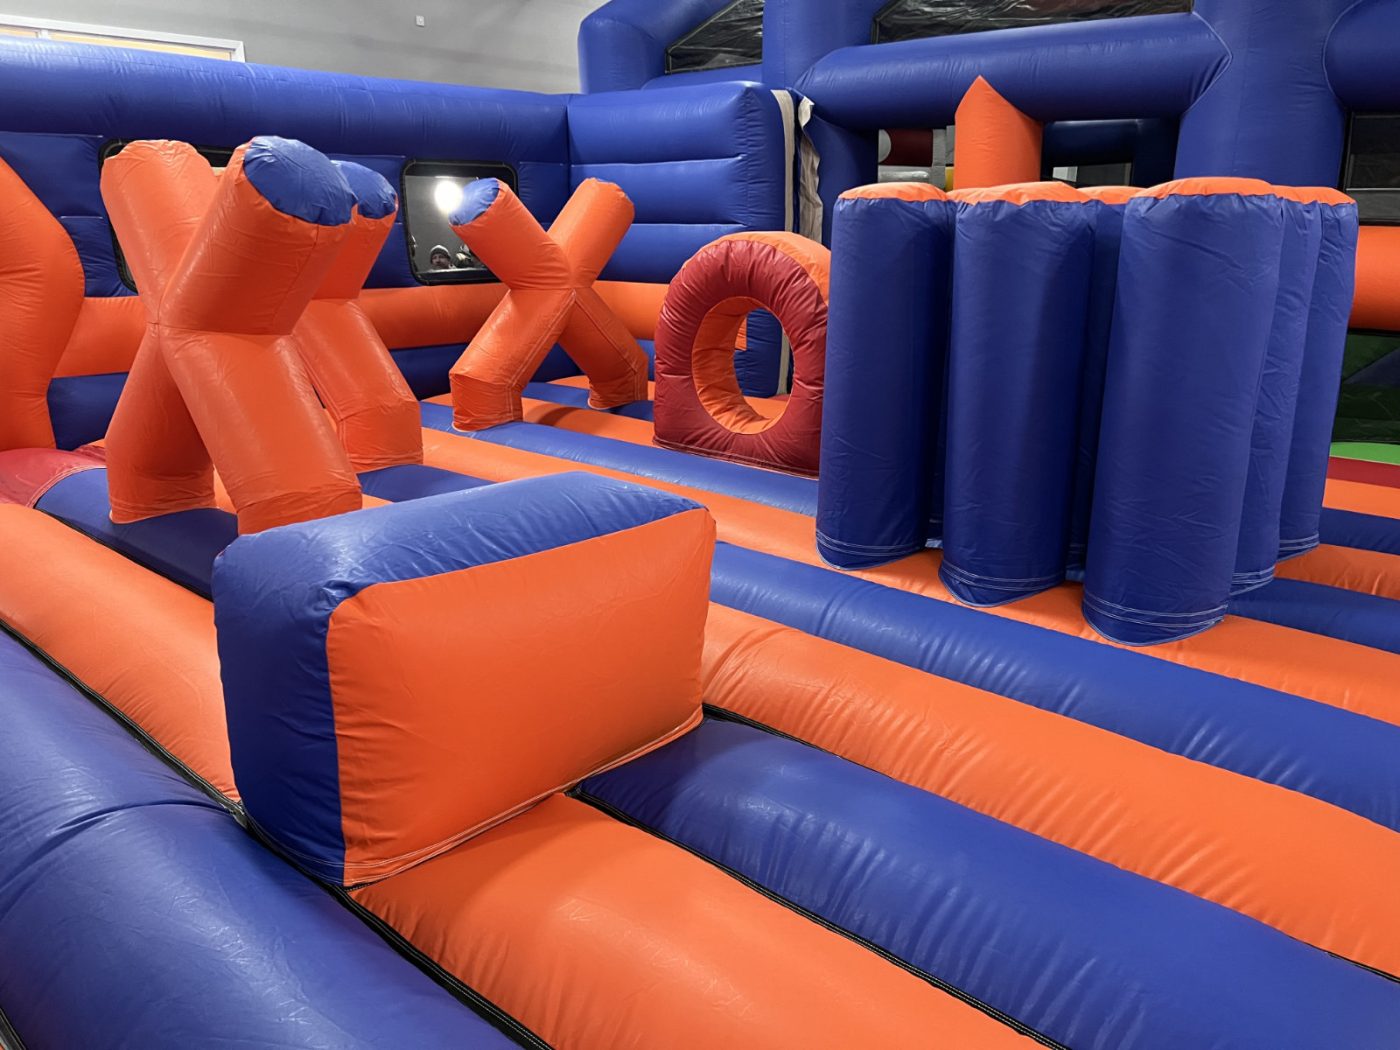 Noughts and crosses inflatables at Adventure Planet in Glasgow